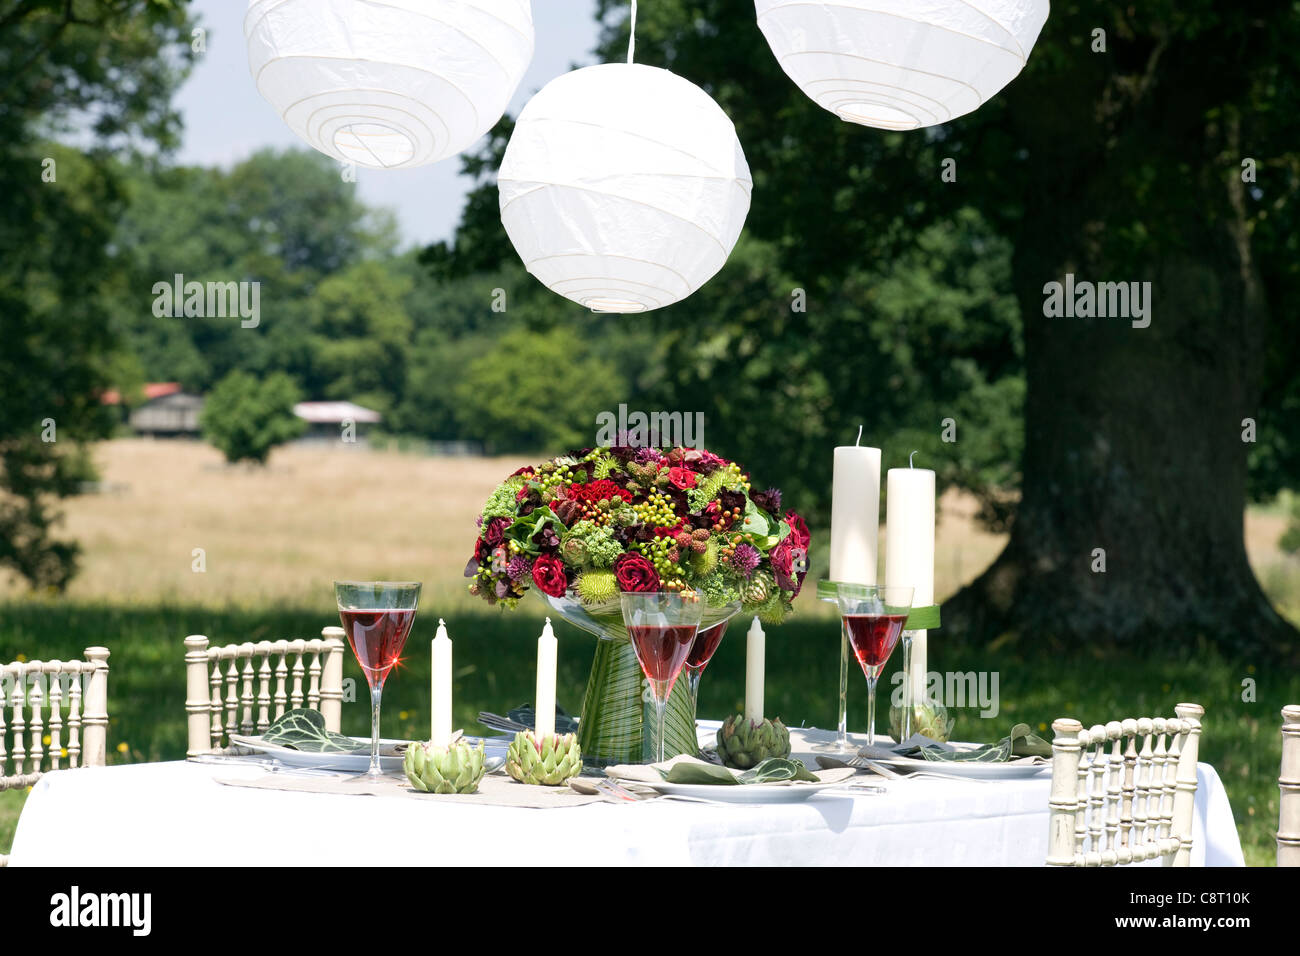 outdoor picnic with exotic table centrepiece Stock Photo